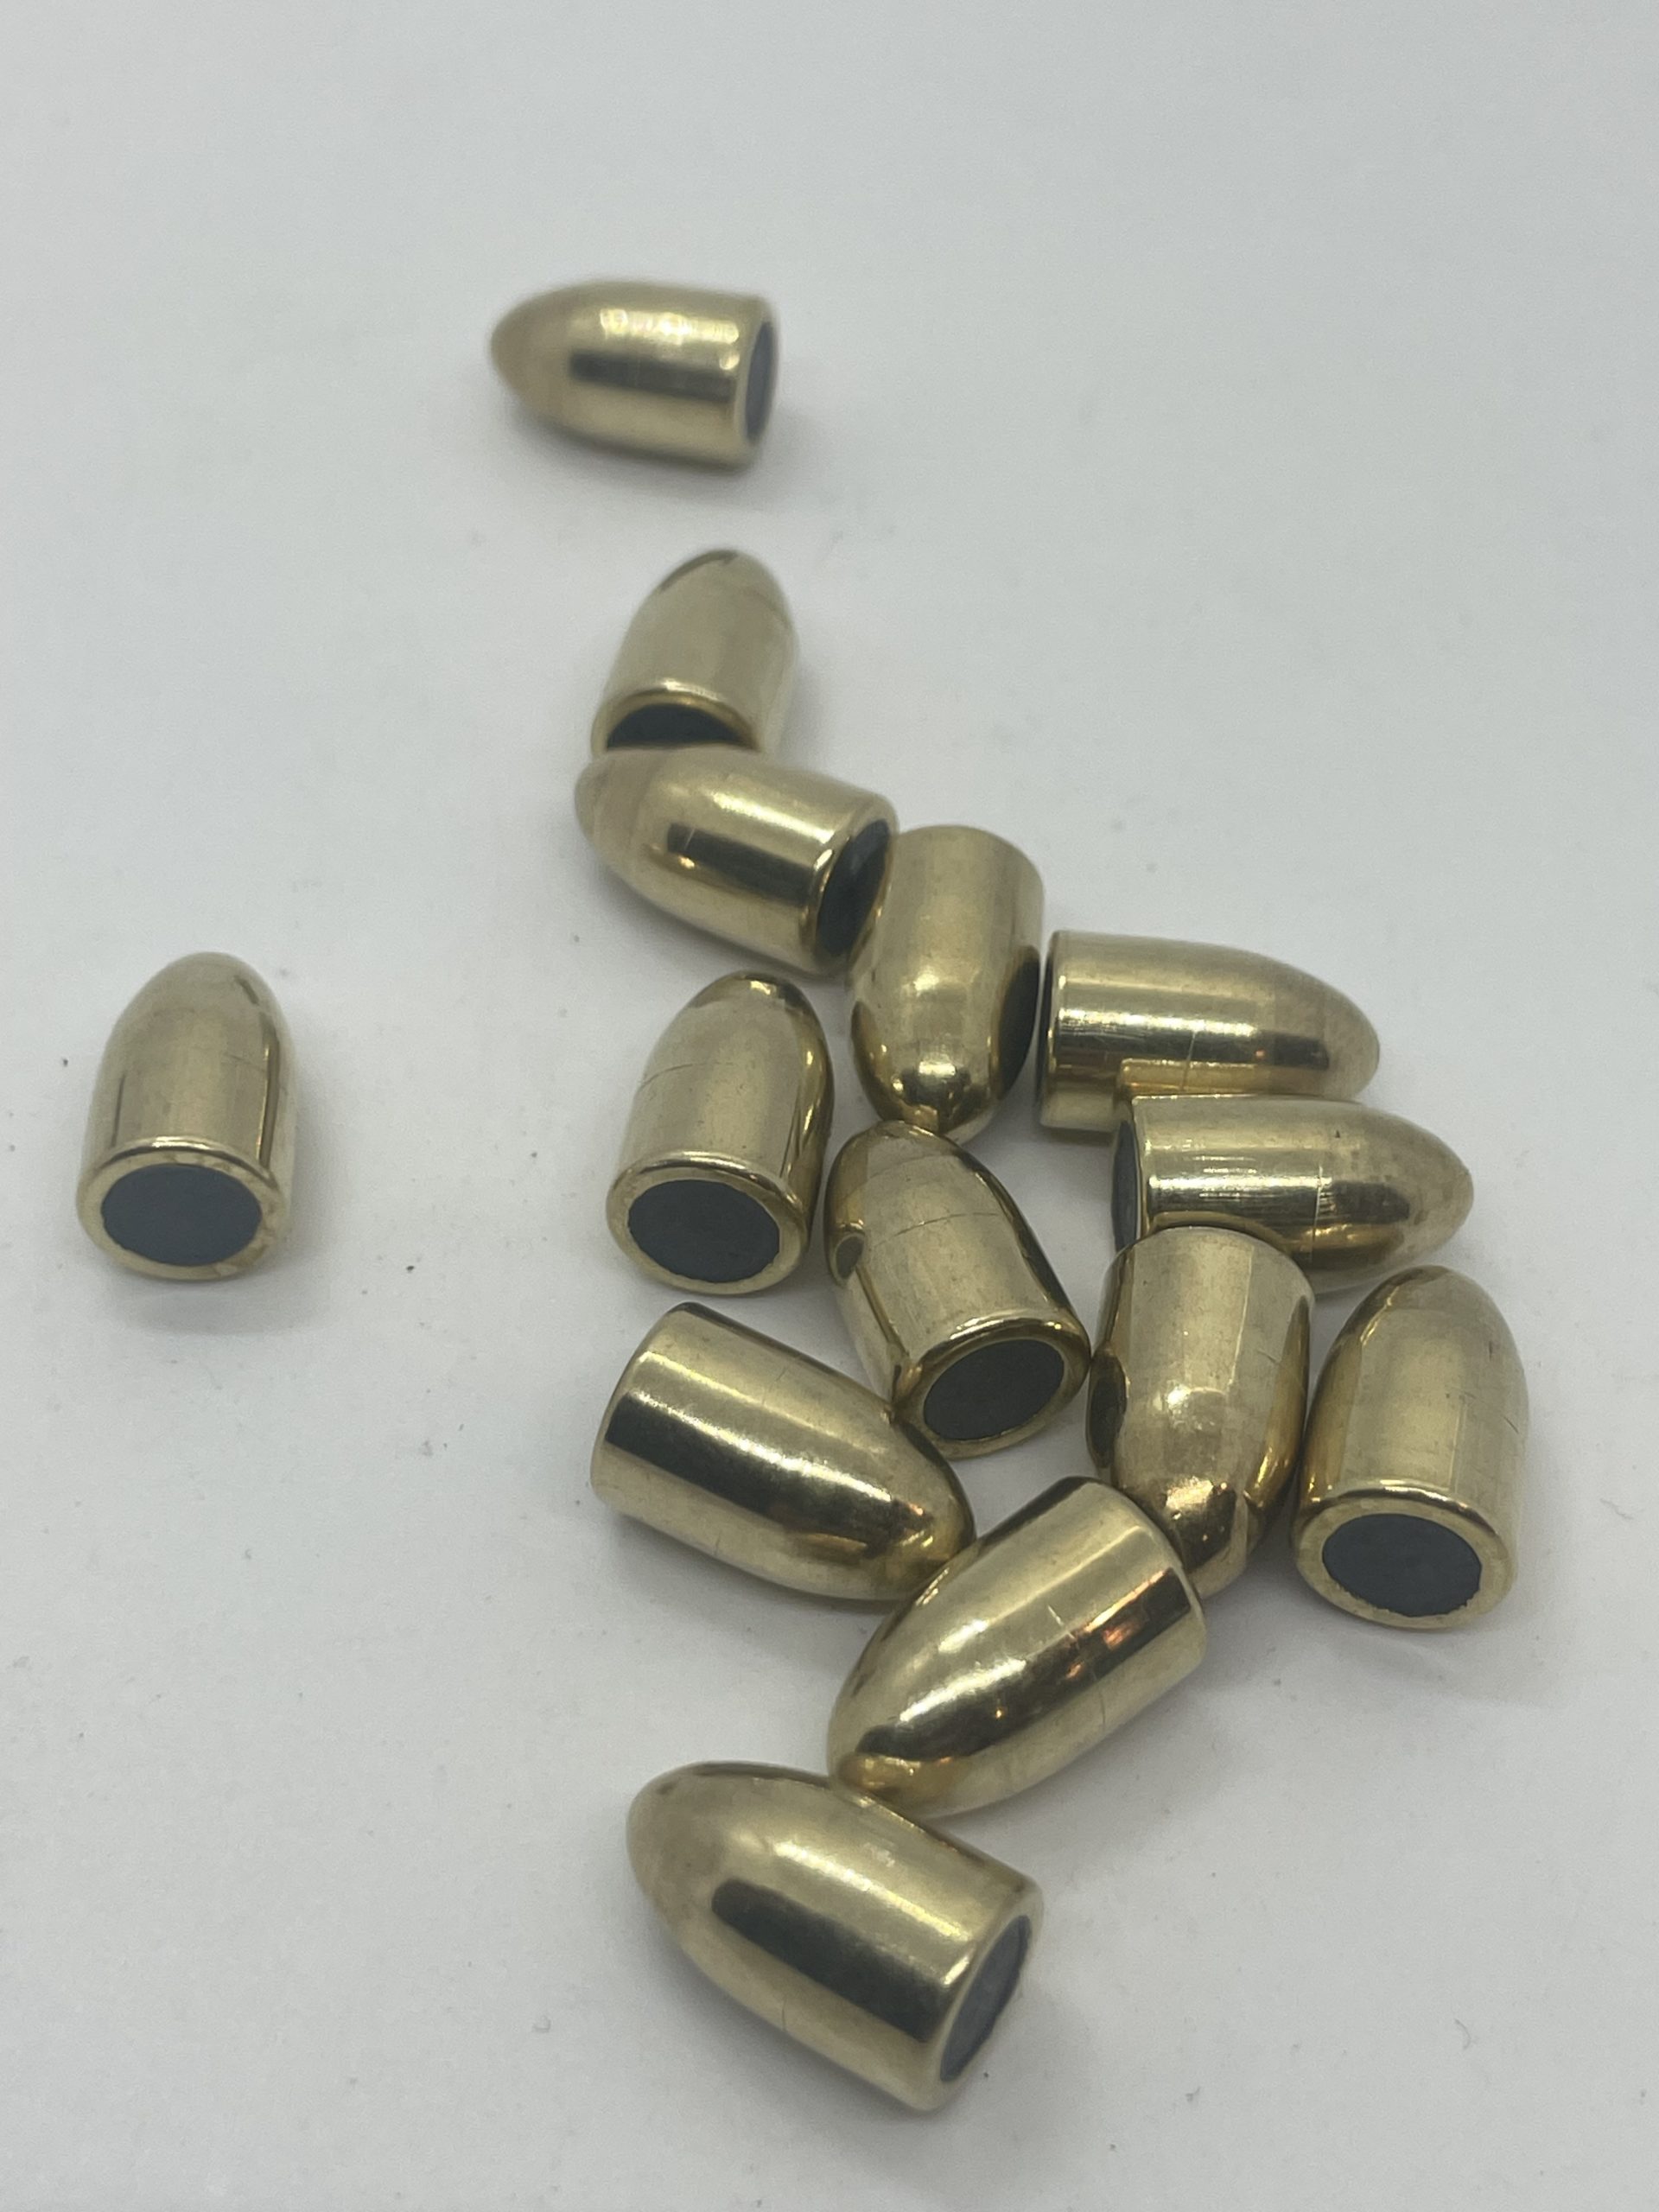 9mm (.355) 115 & 124 Grain Mixed Round nose, Full Metal Jacket Bullets ...